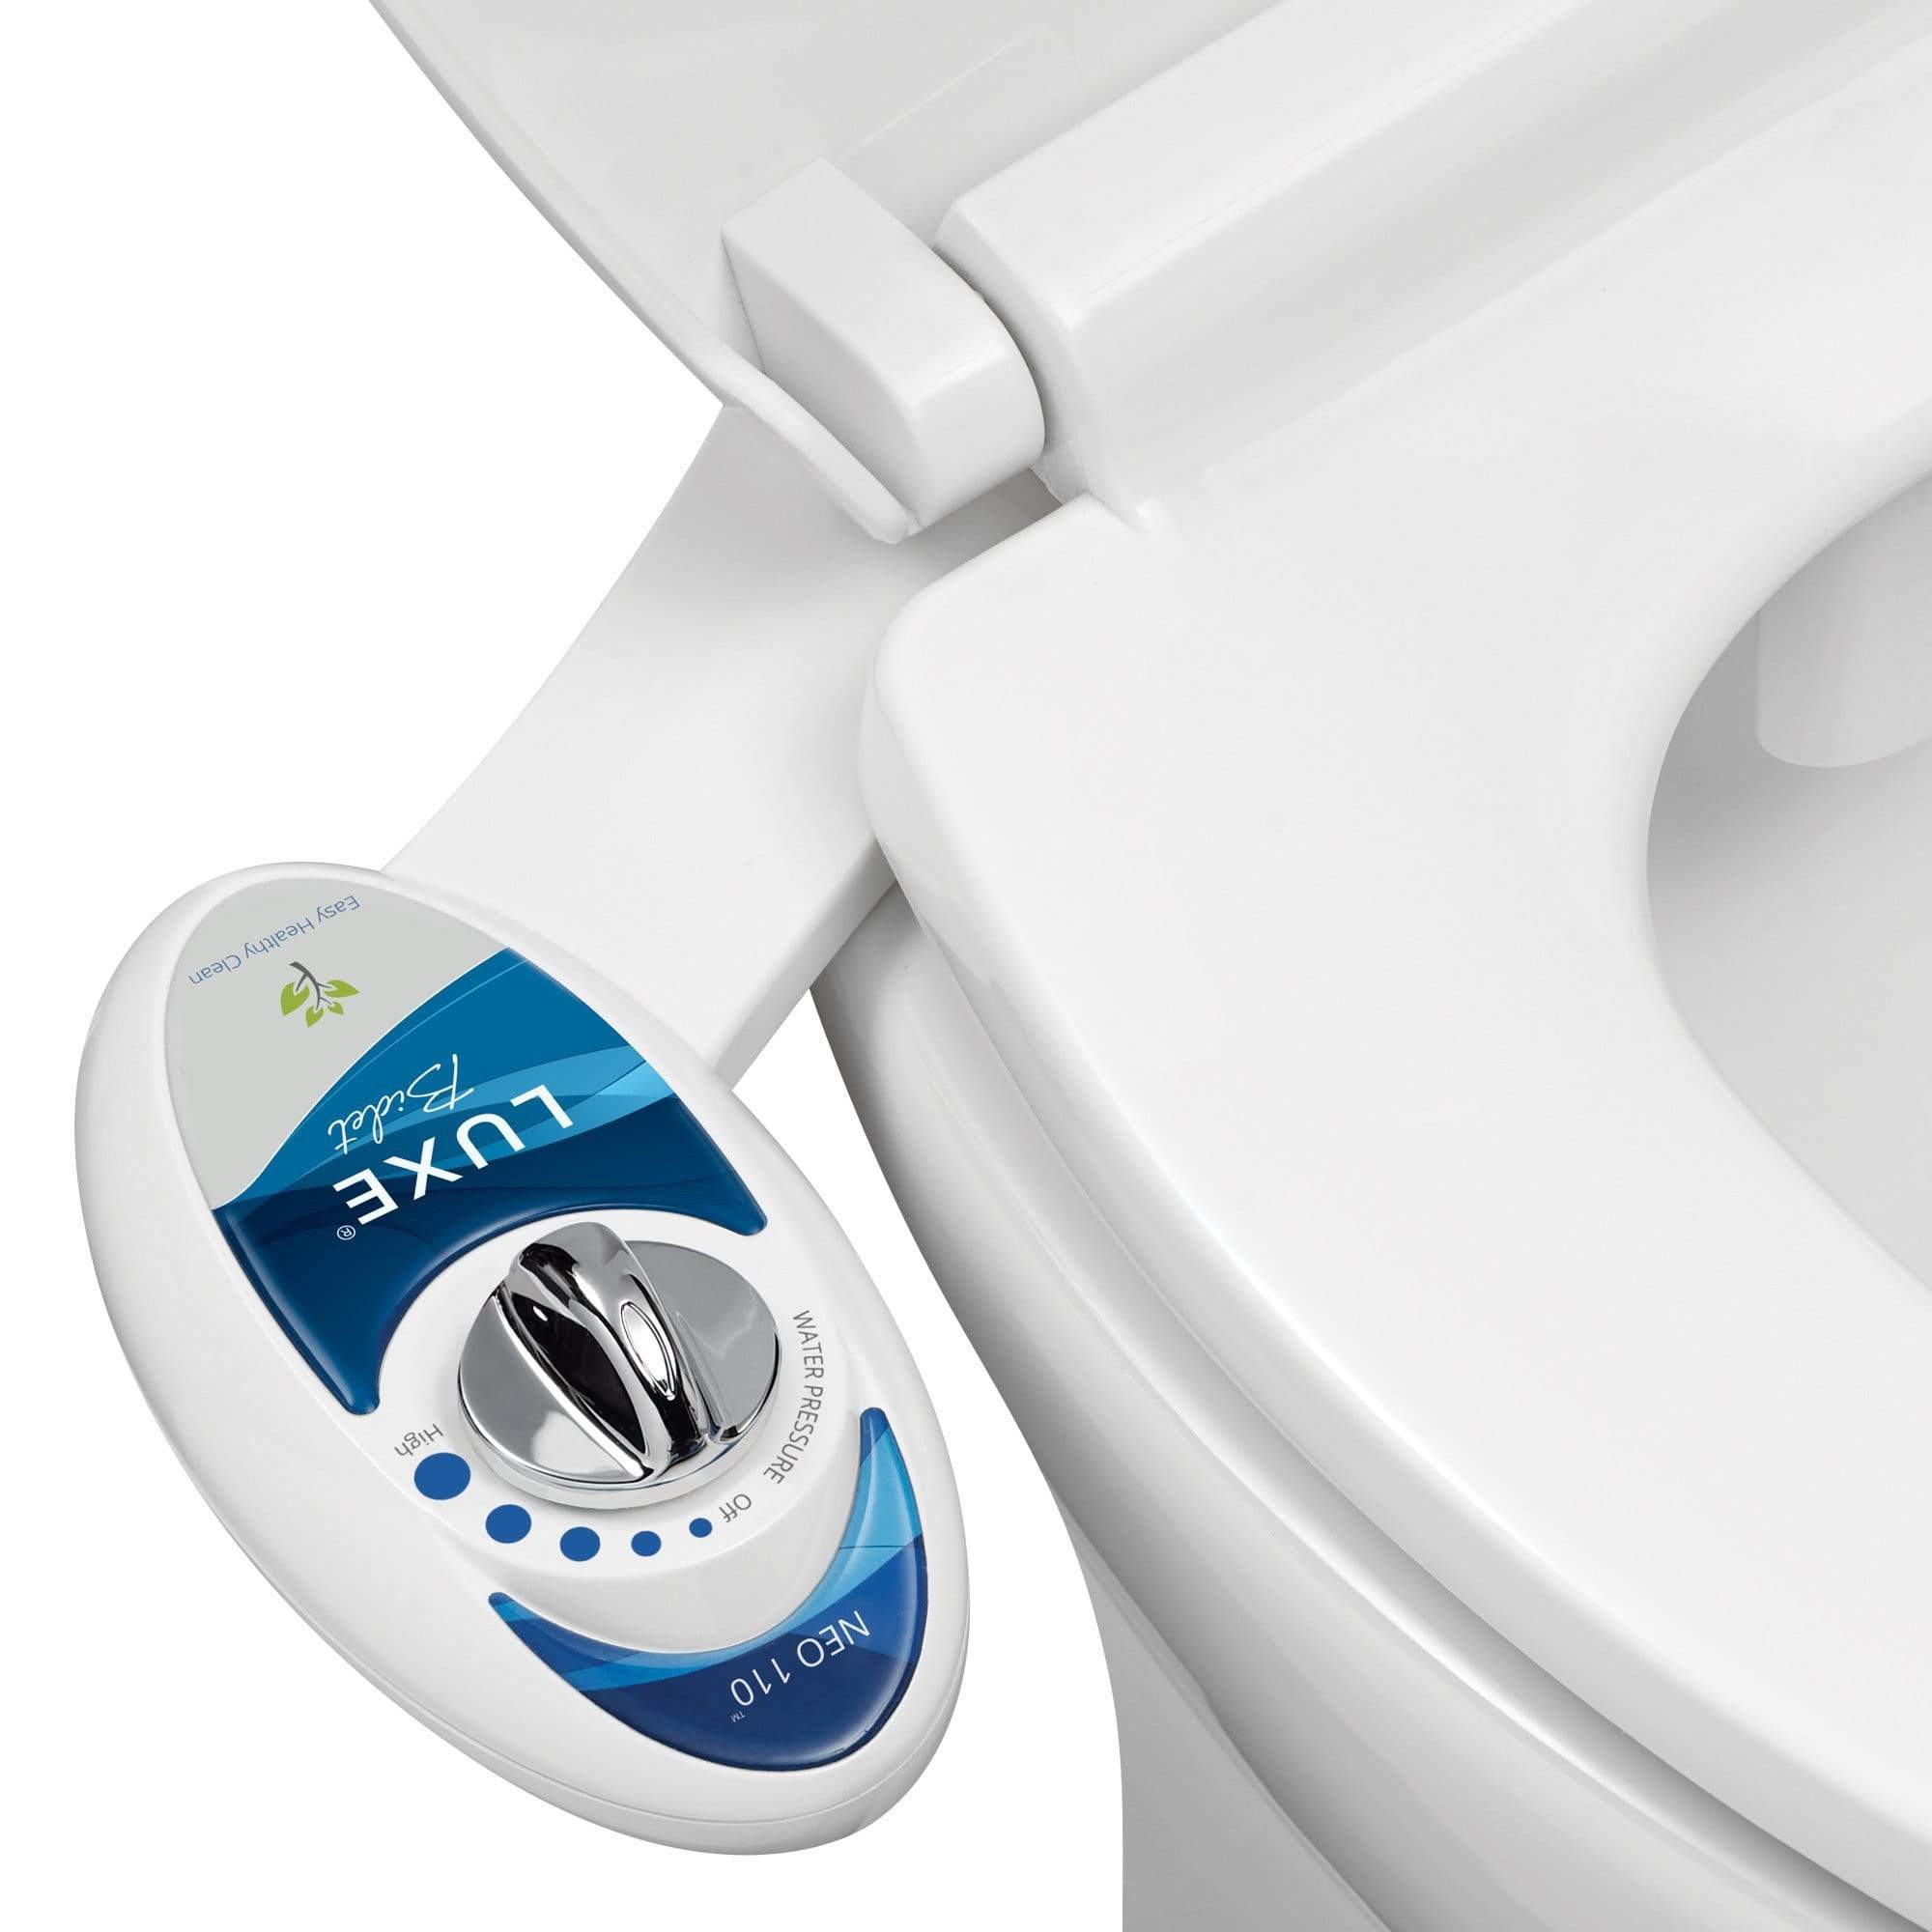 NEO 110: Imperfect Packaging - NEO 110 Blue installed on a toilet, open lid